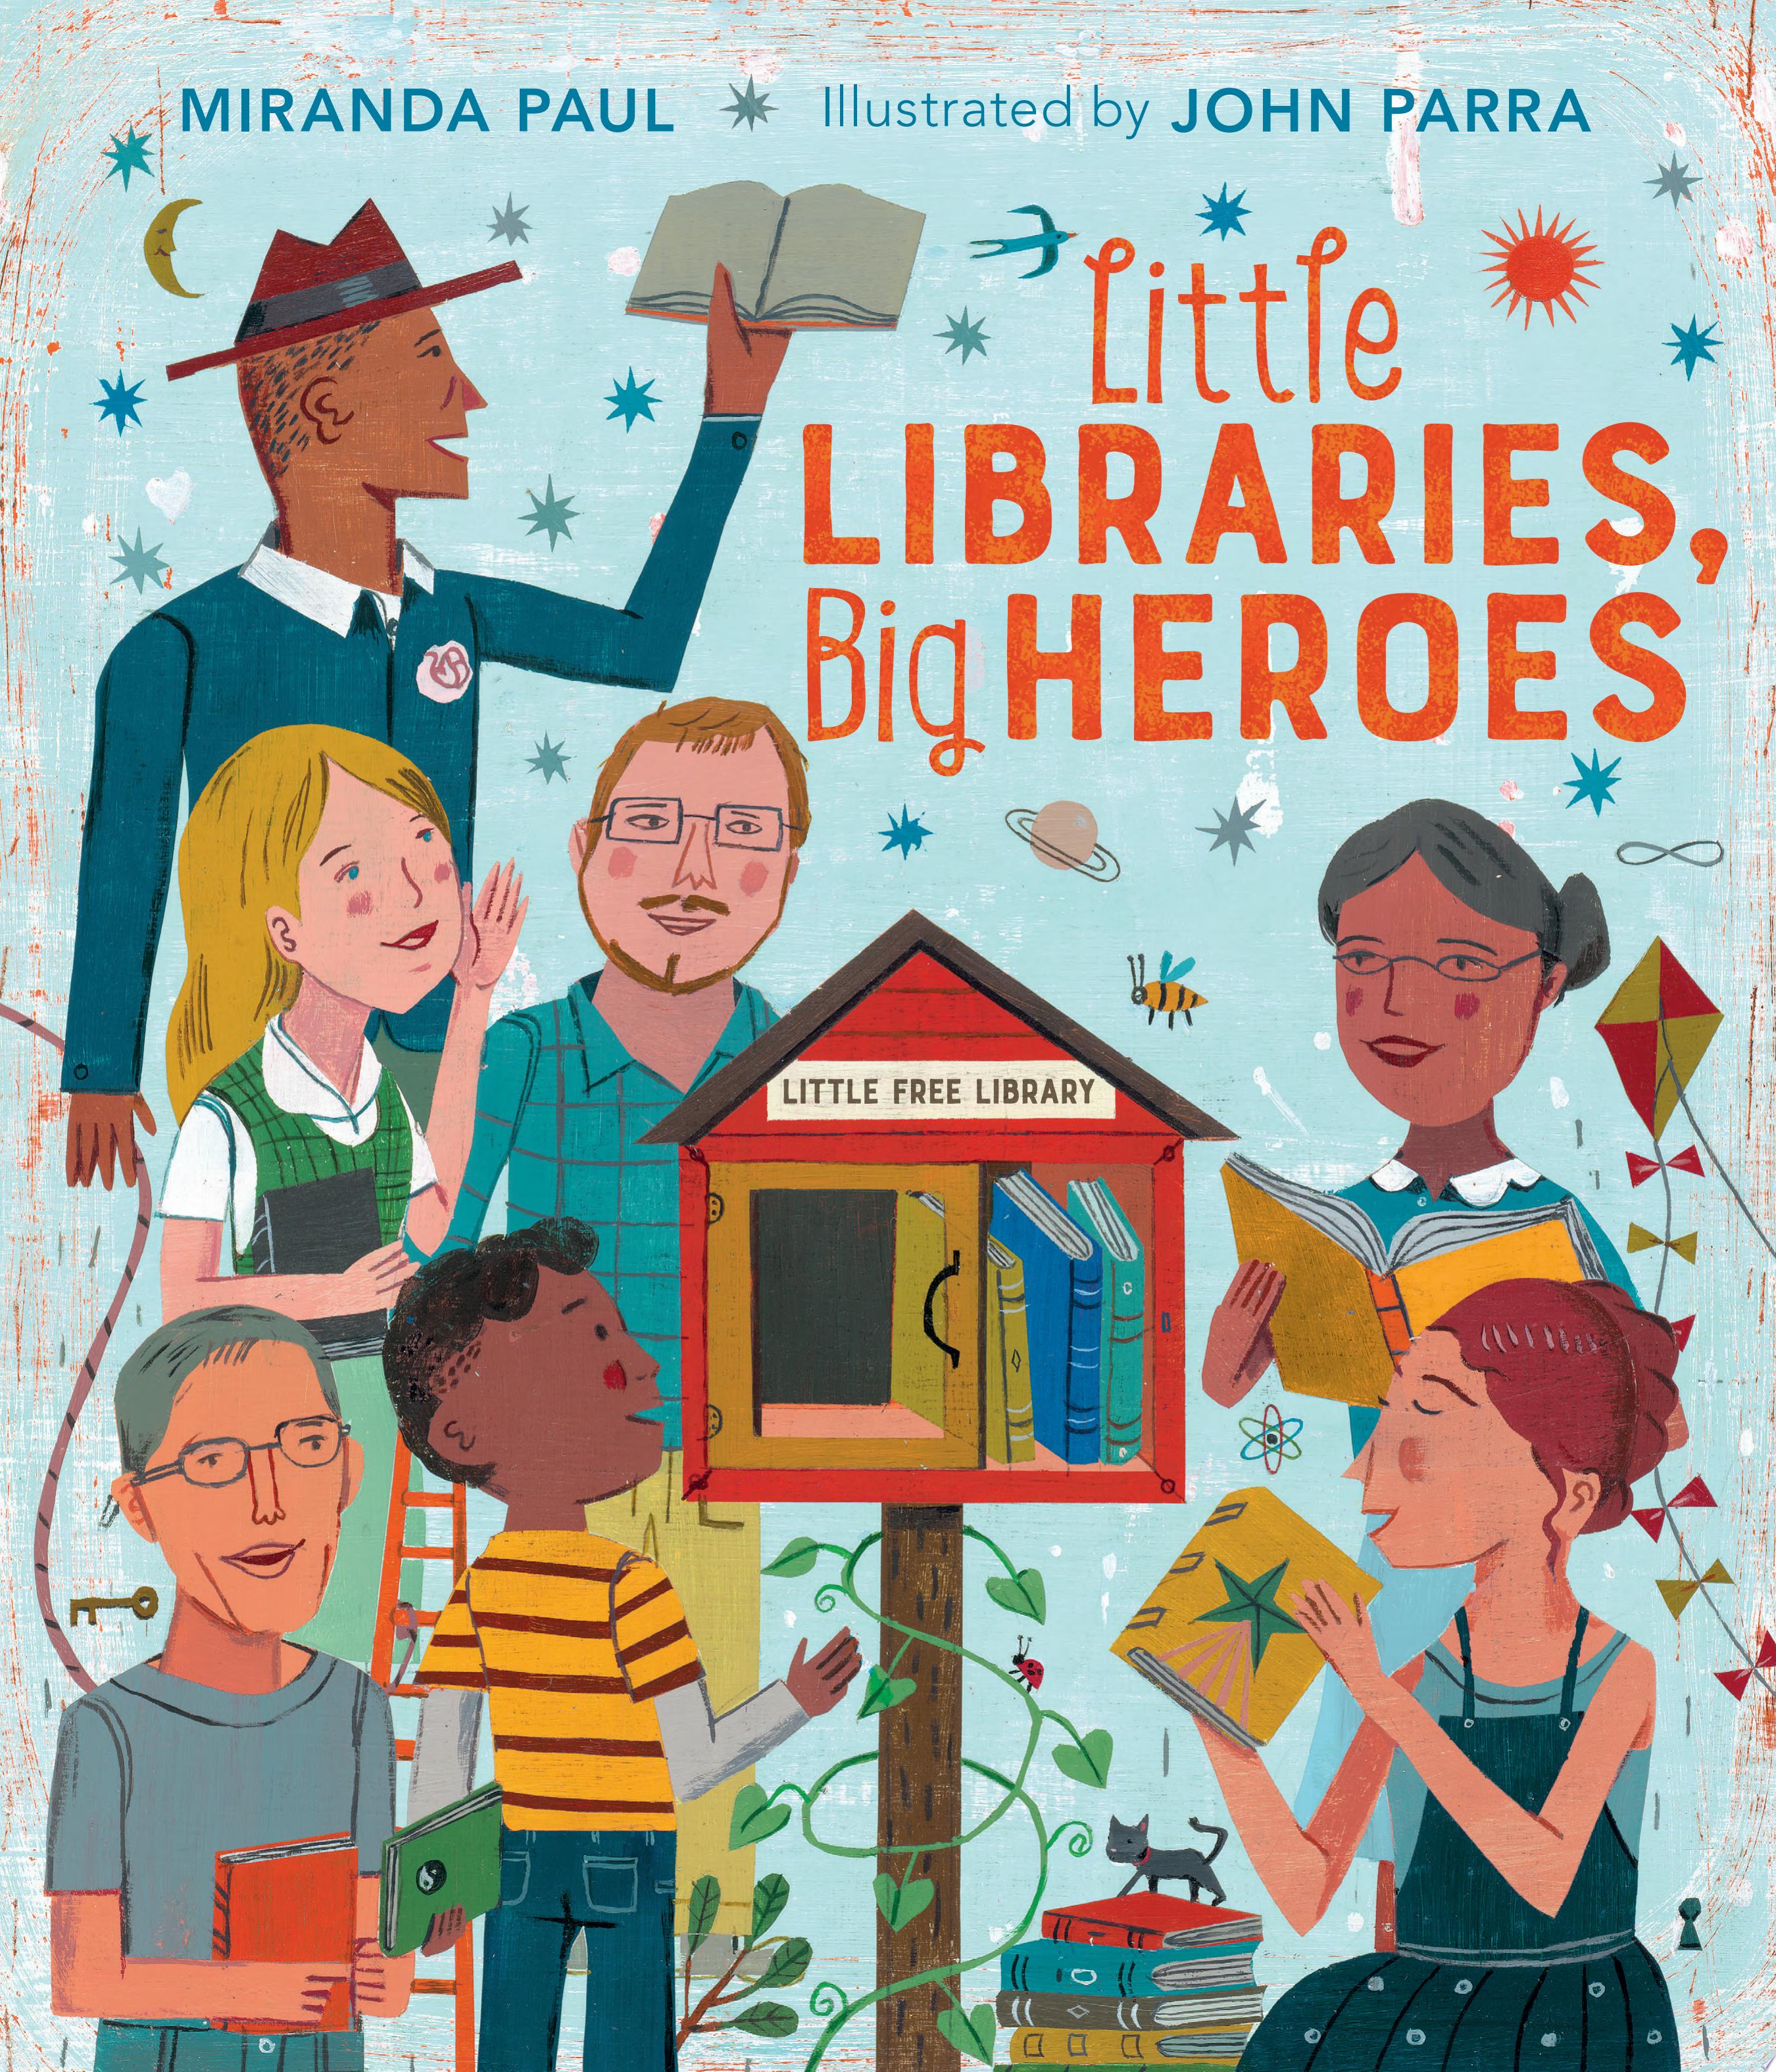 Image for "Little Libraries, Big Heroes"